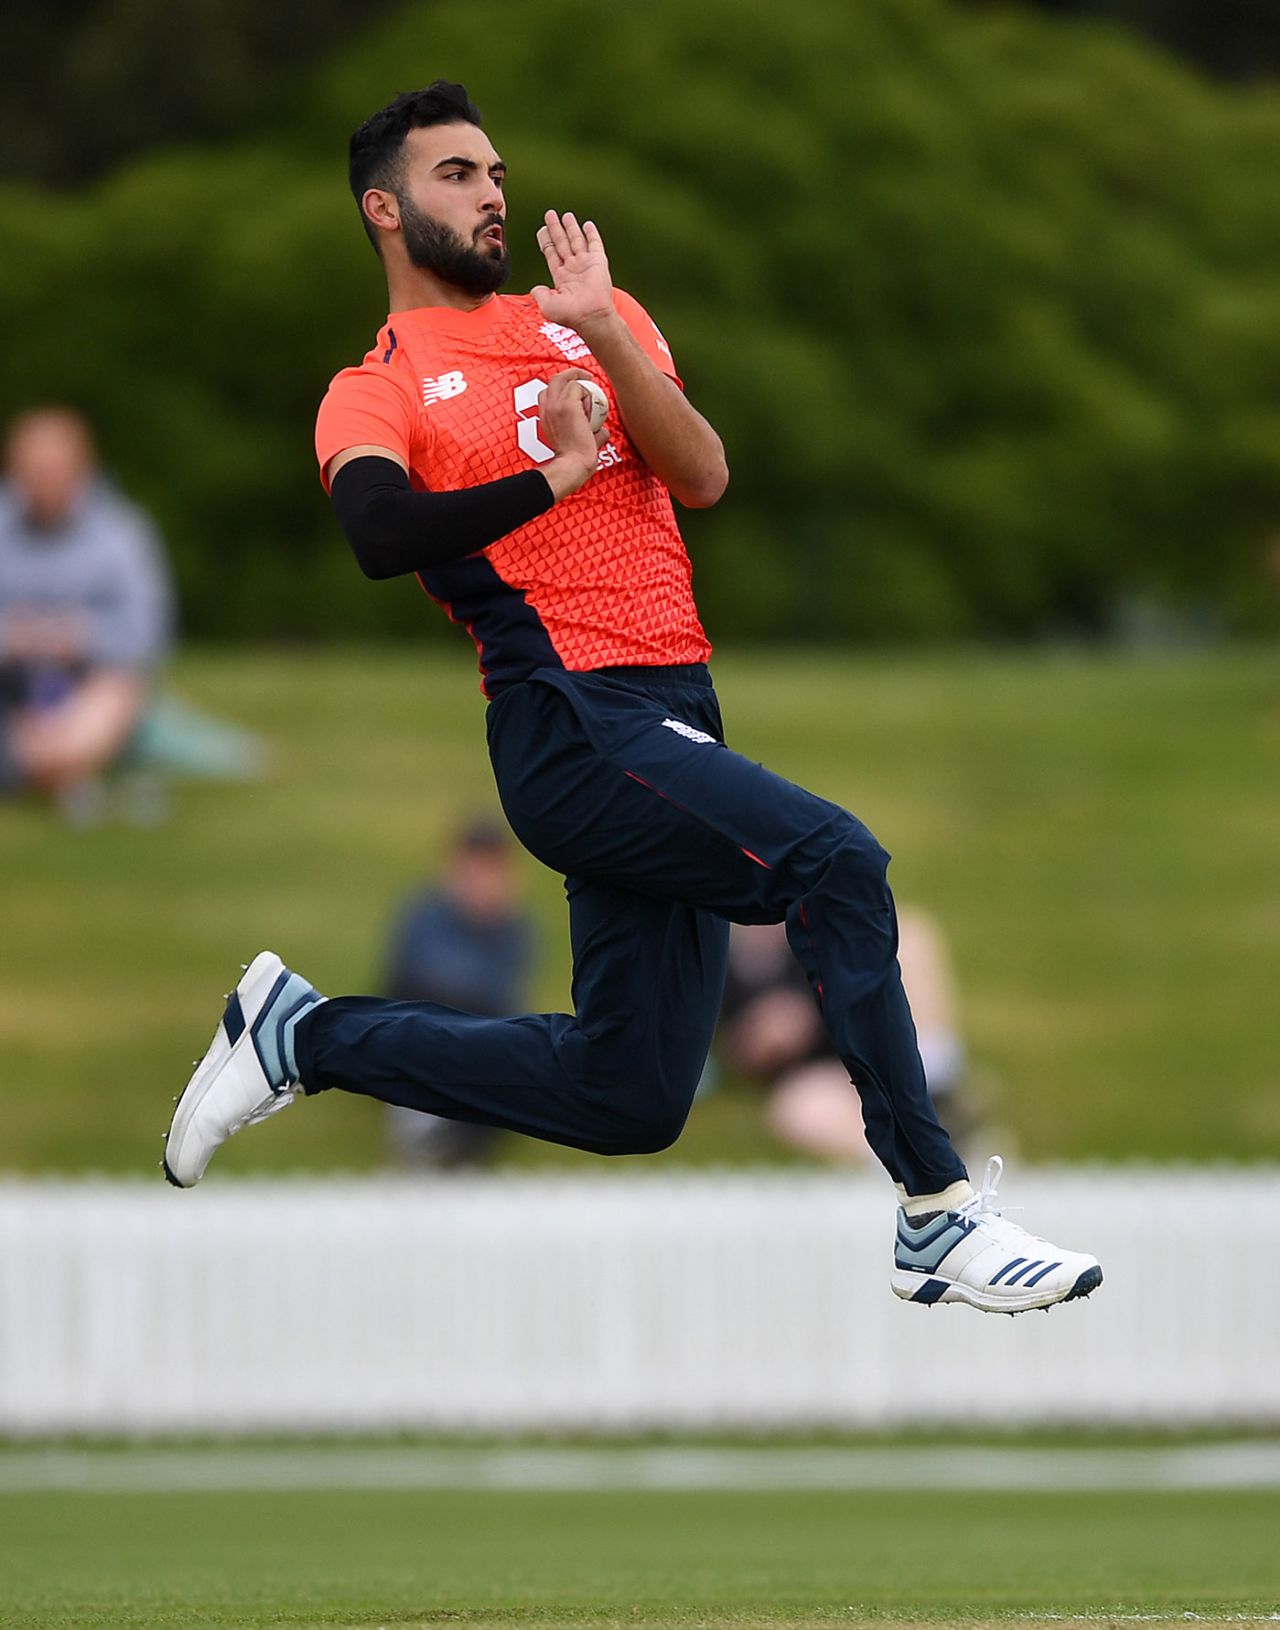 Saqib Mahmood was one of the new faces in the England attack, New Zealand XI v England XI, Tour match, Lincoln, October 27, 2019